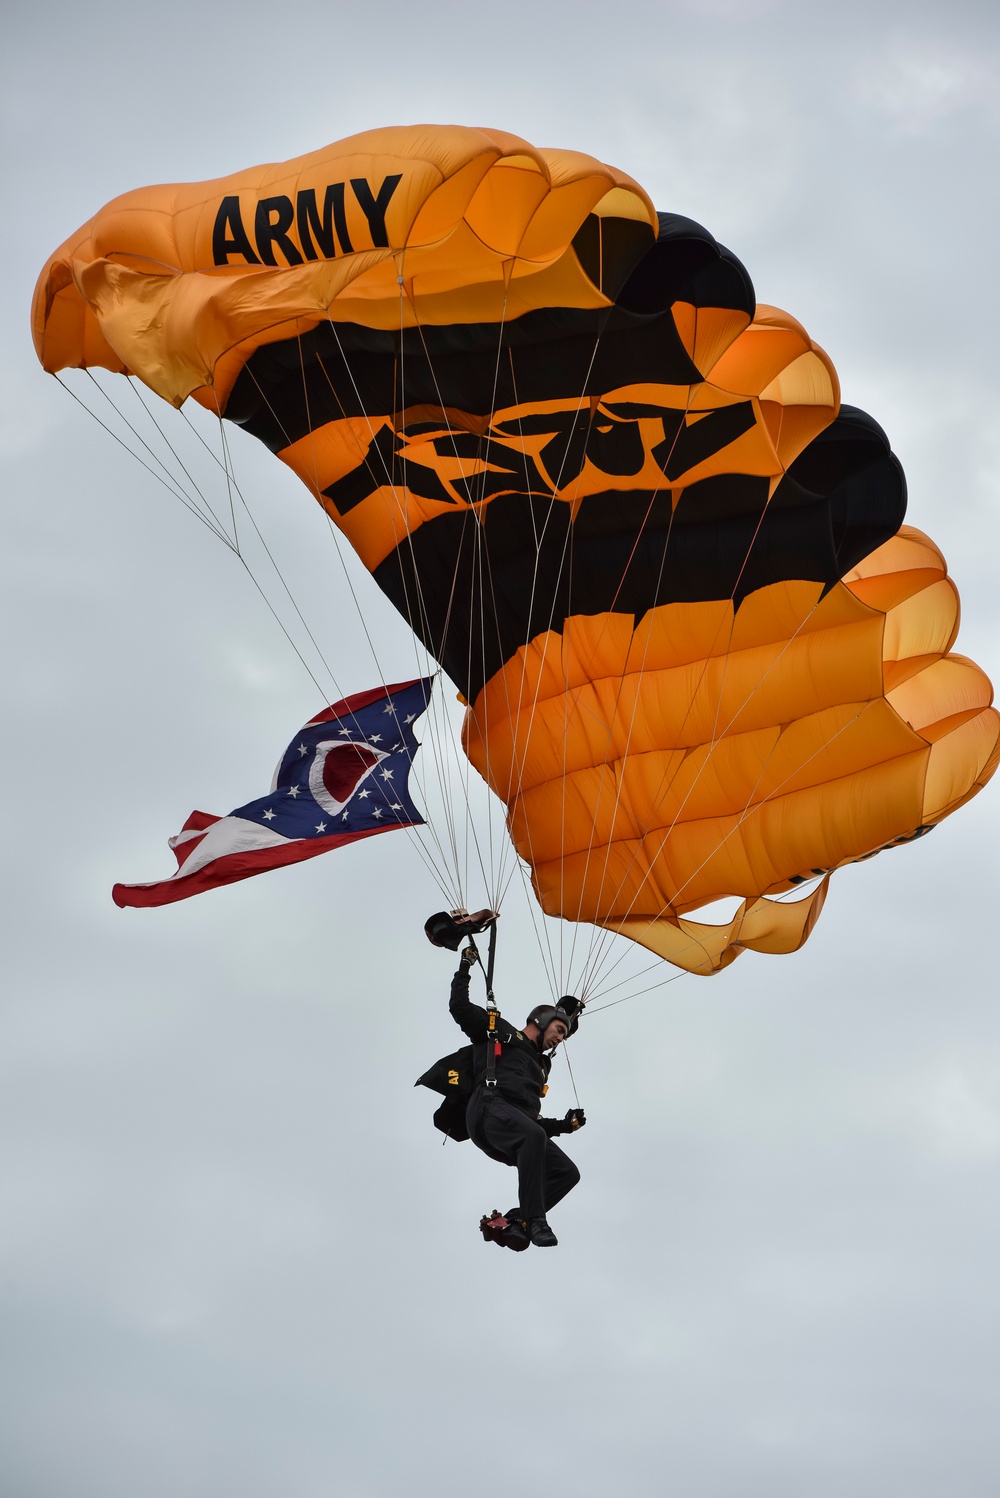 Golden Knights at Toledo Air Show